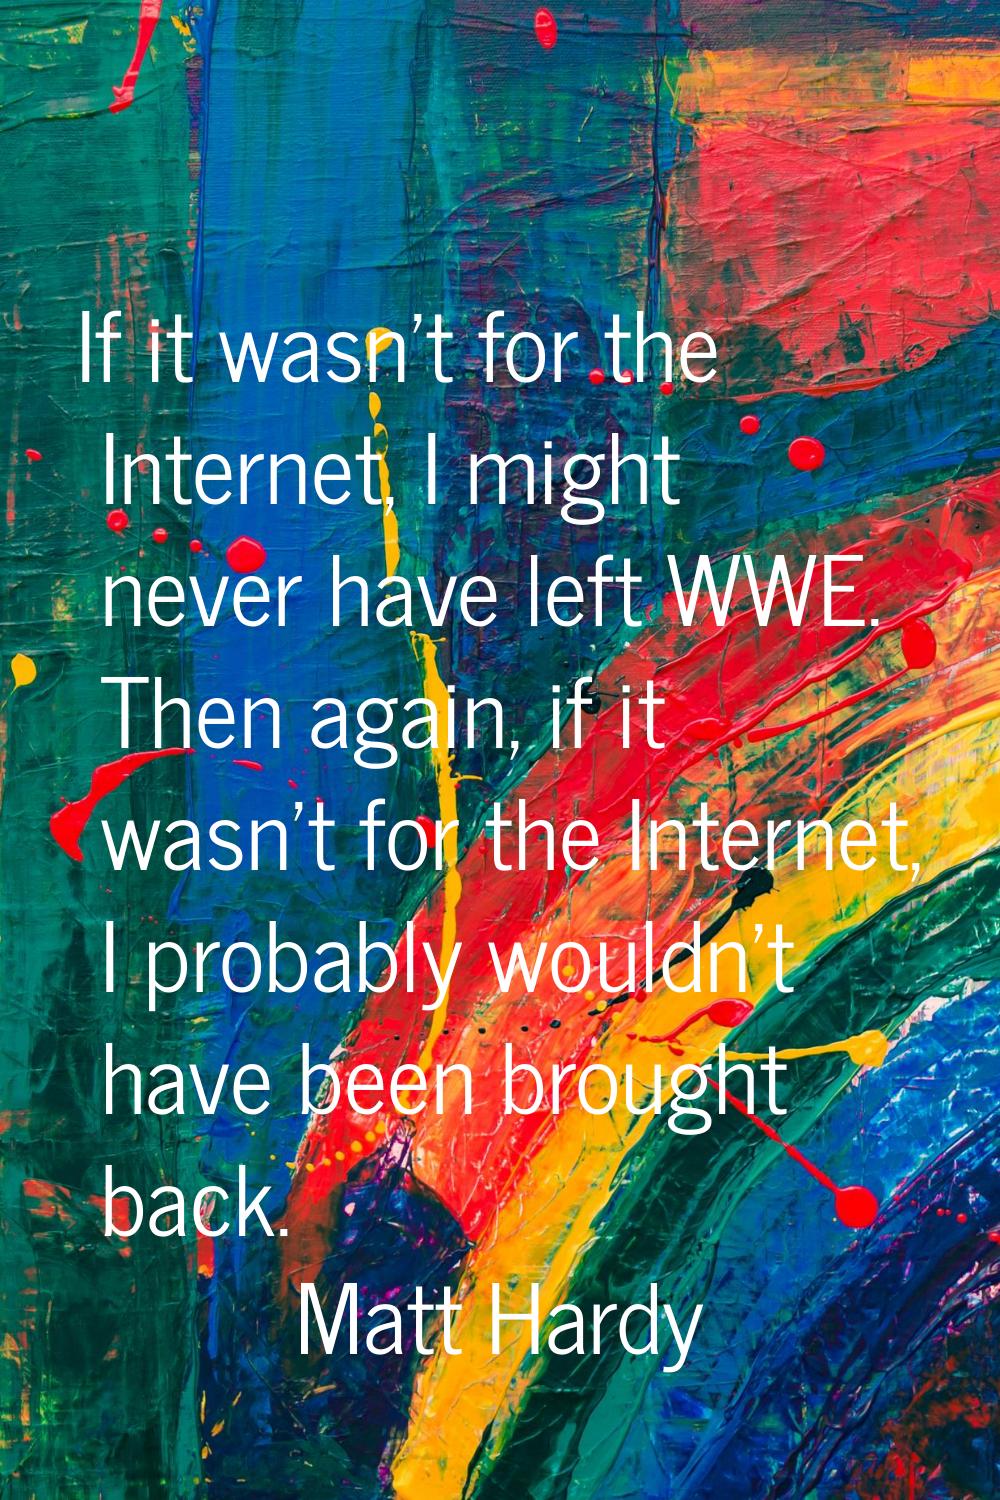 If it wasn't for the Internet, I might never have left WWE. Then again, if it wasn't for the Intern